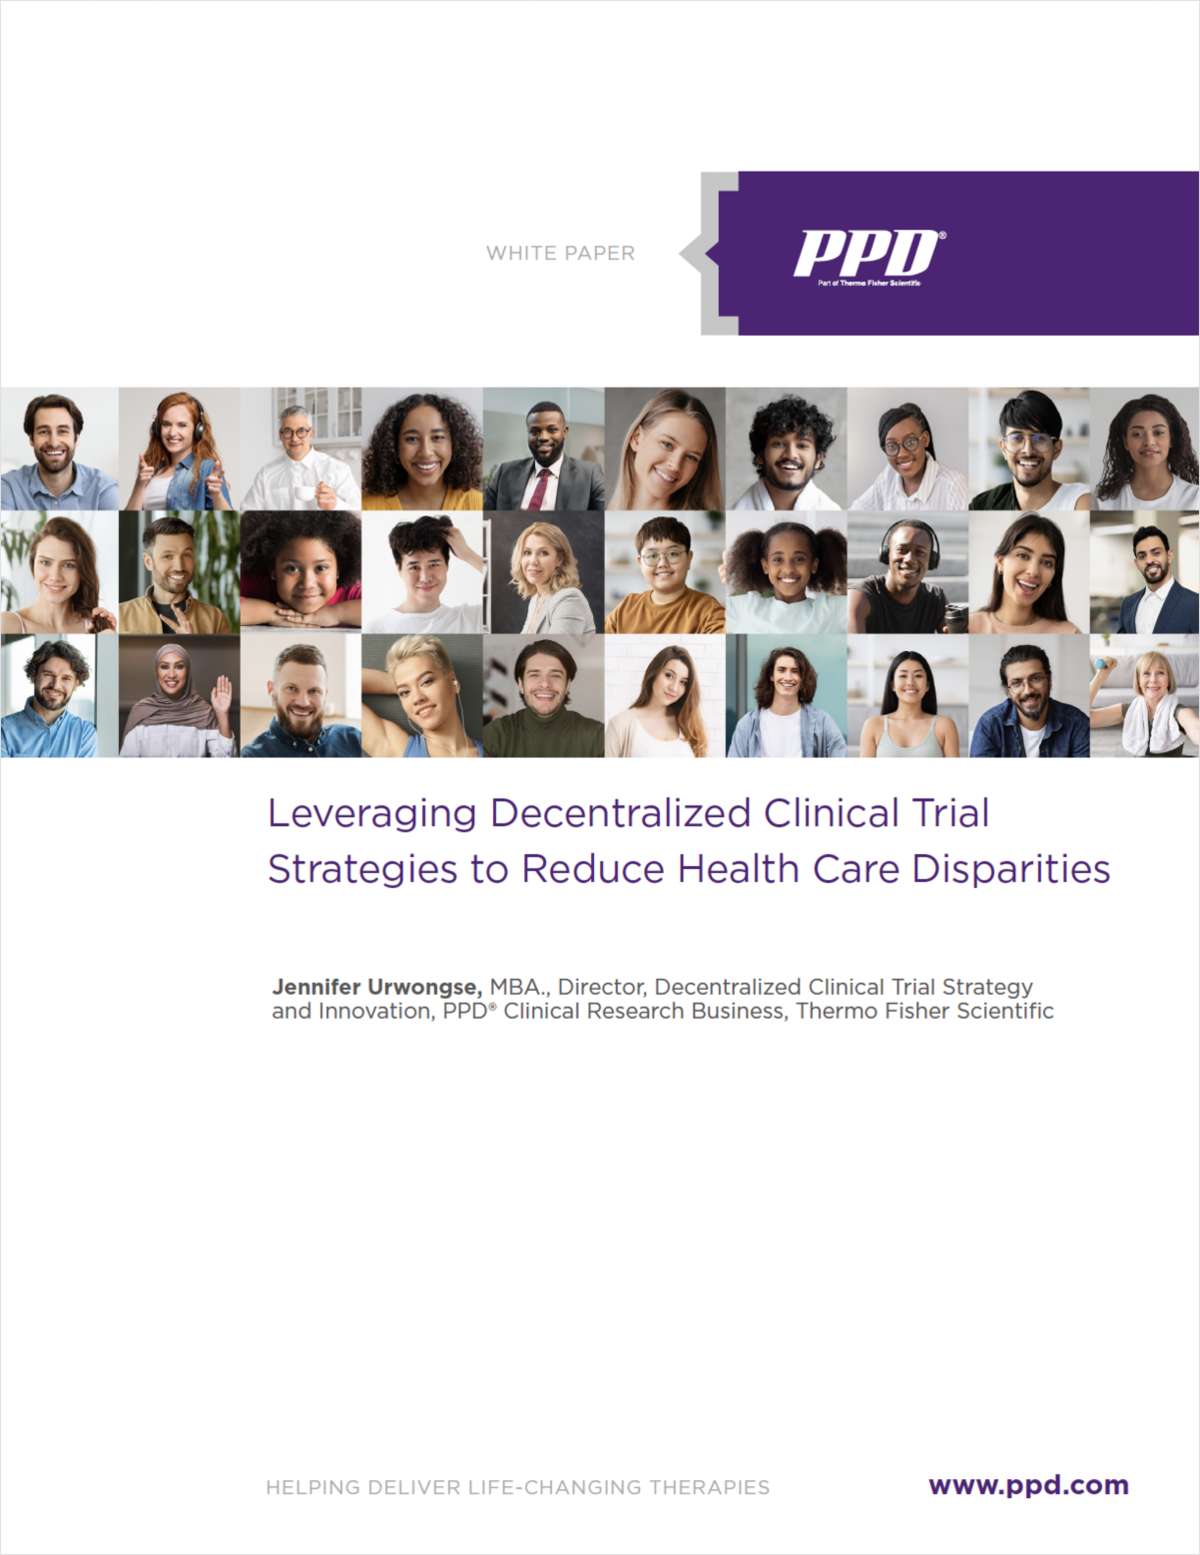 Leveraging Decentralized Clinical Trial Strategies to Reduce Health Care Disparities